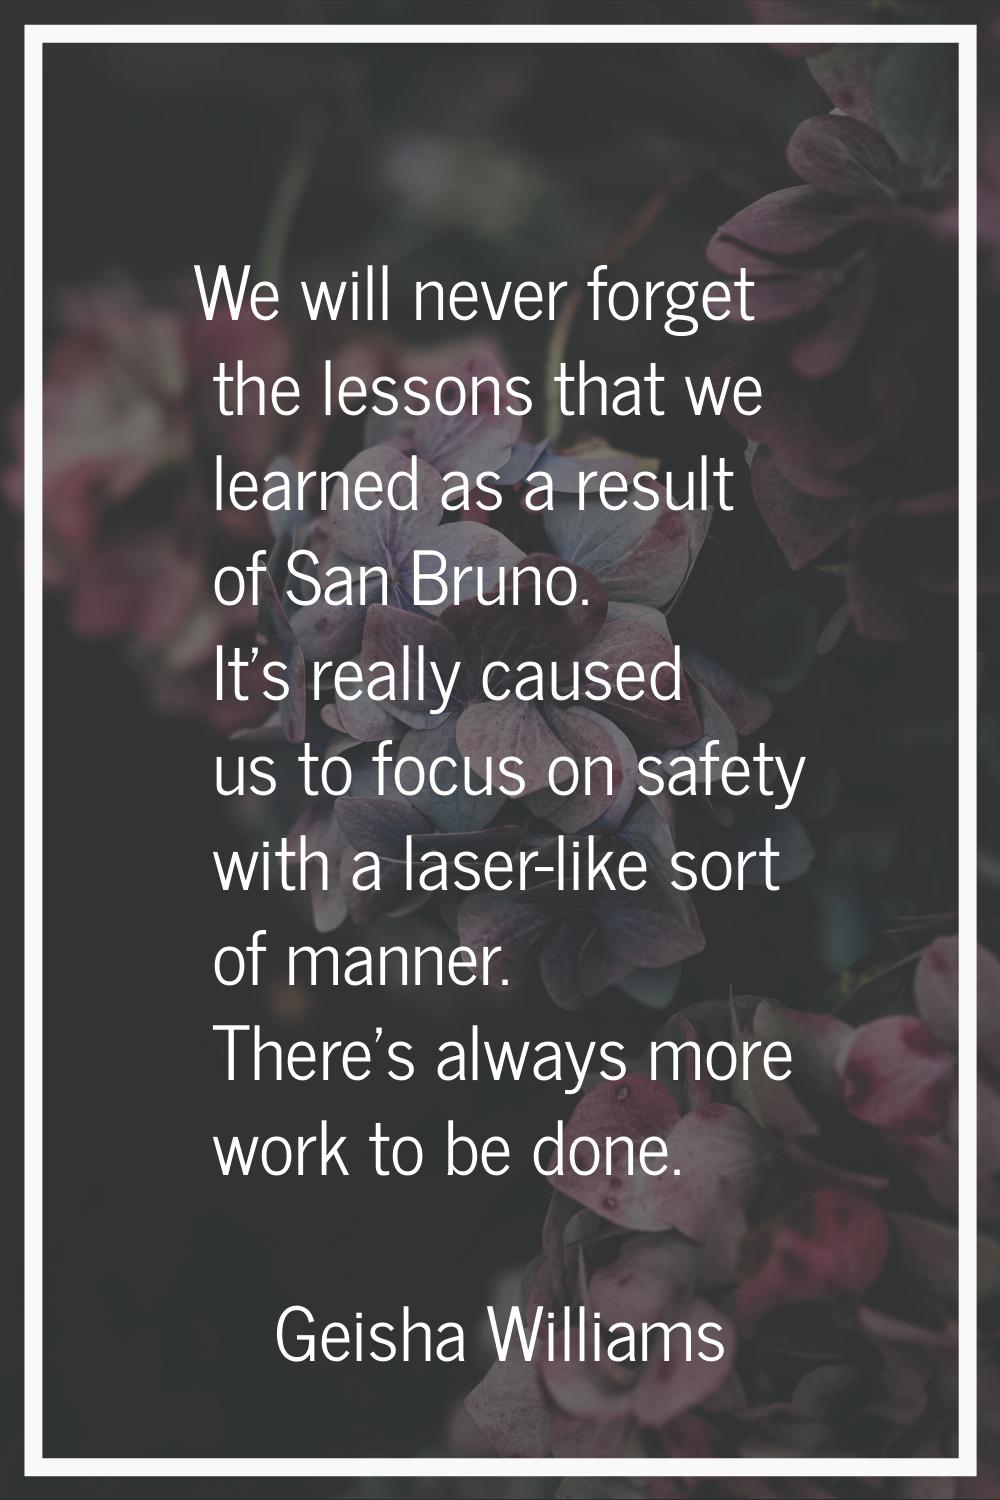 We will never forget the lessons that we learned as a result of San Bruno. It's really caused us to